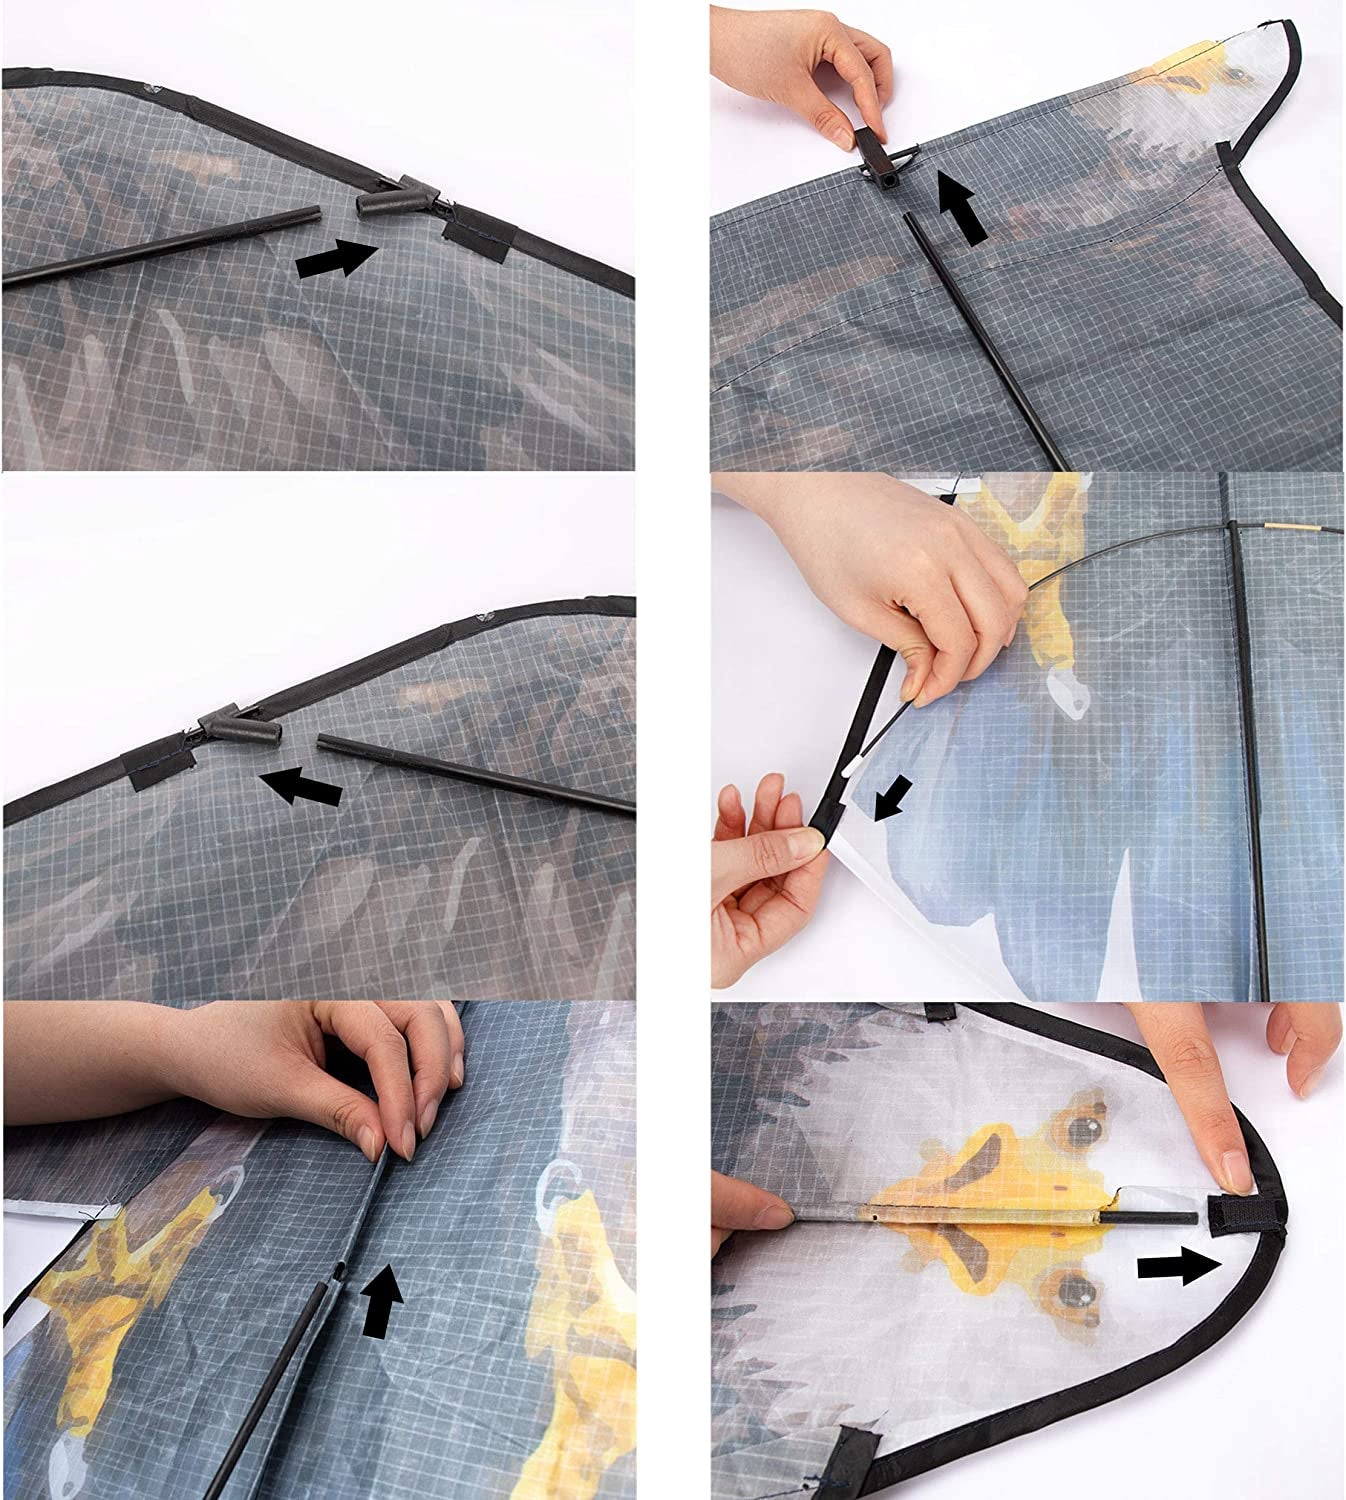 Eagle Kite for Kids and Adults Large Kites Easy to Fly Beginners Single Line String for Beach Trip Park Outdoor Activities